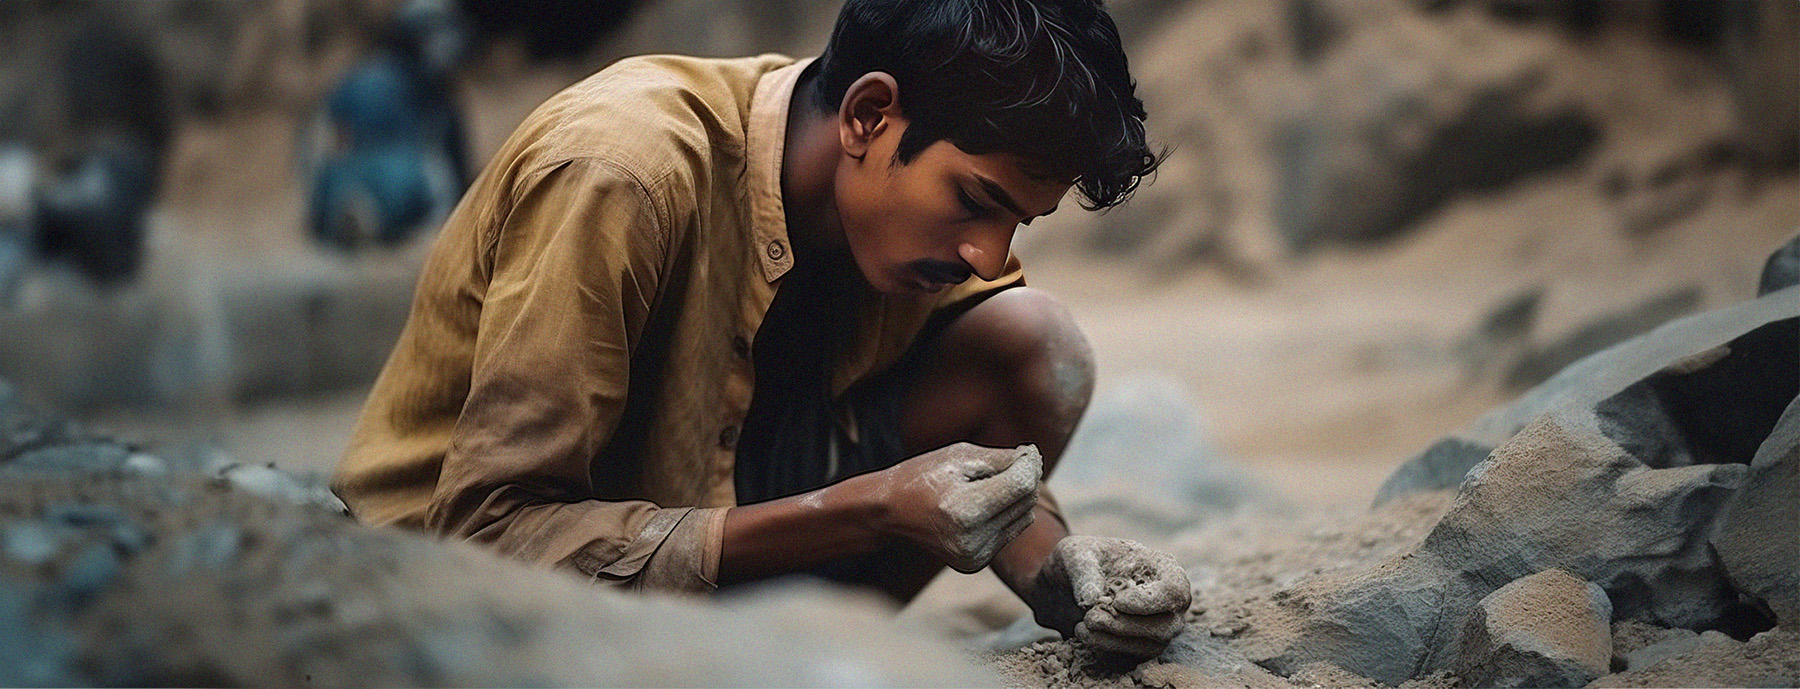 Young male mining by hand in poor working conditions